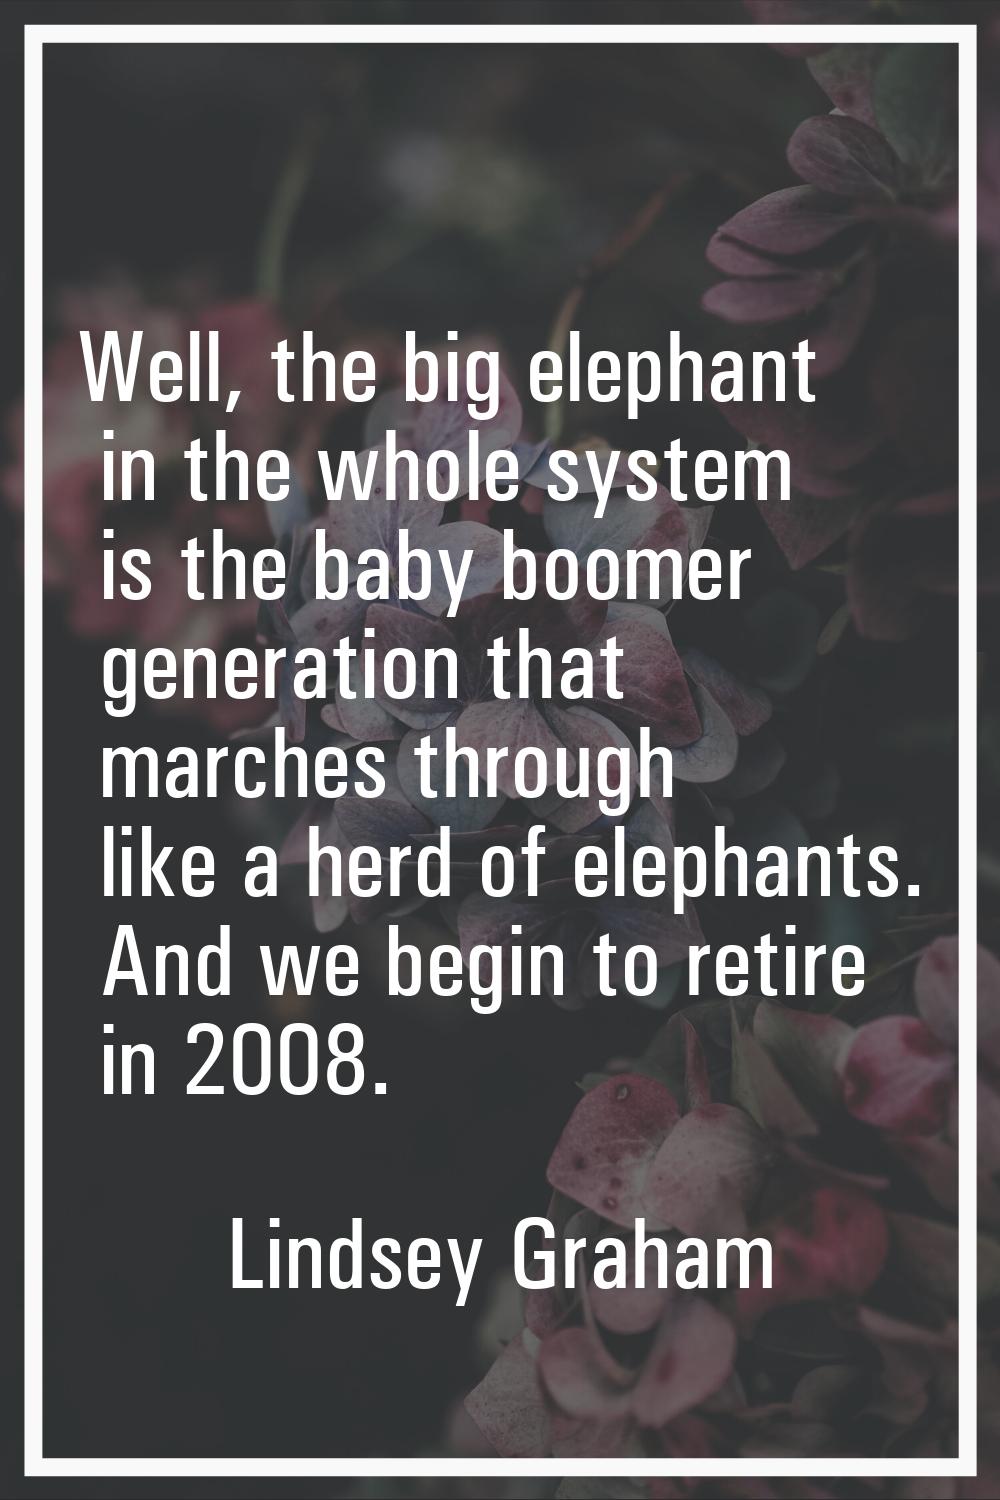 Well, the big elephant in the whole system is the baby boomer generation that marches through like 